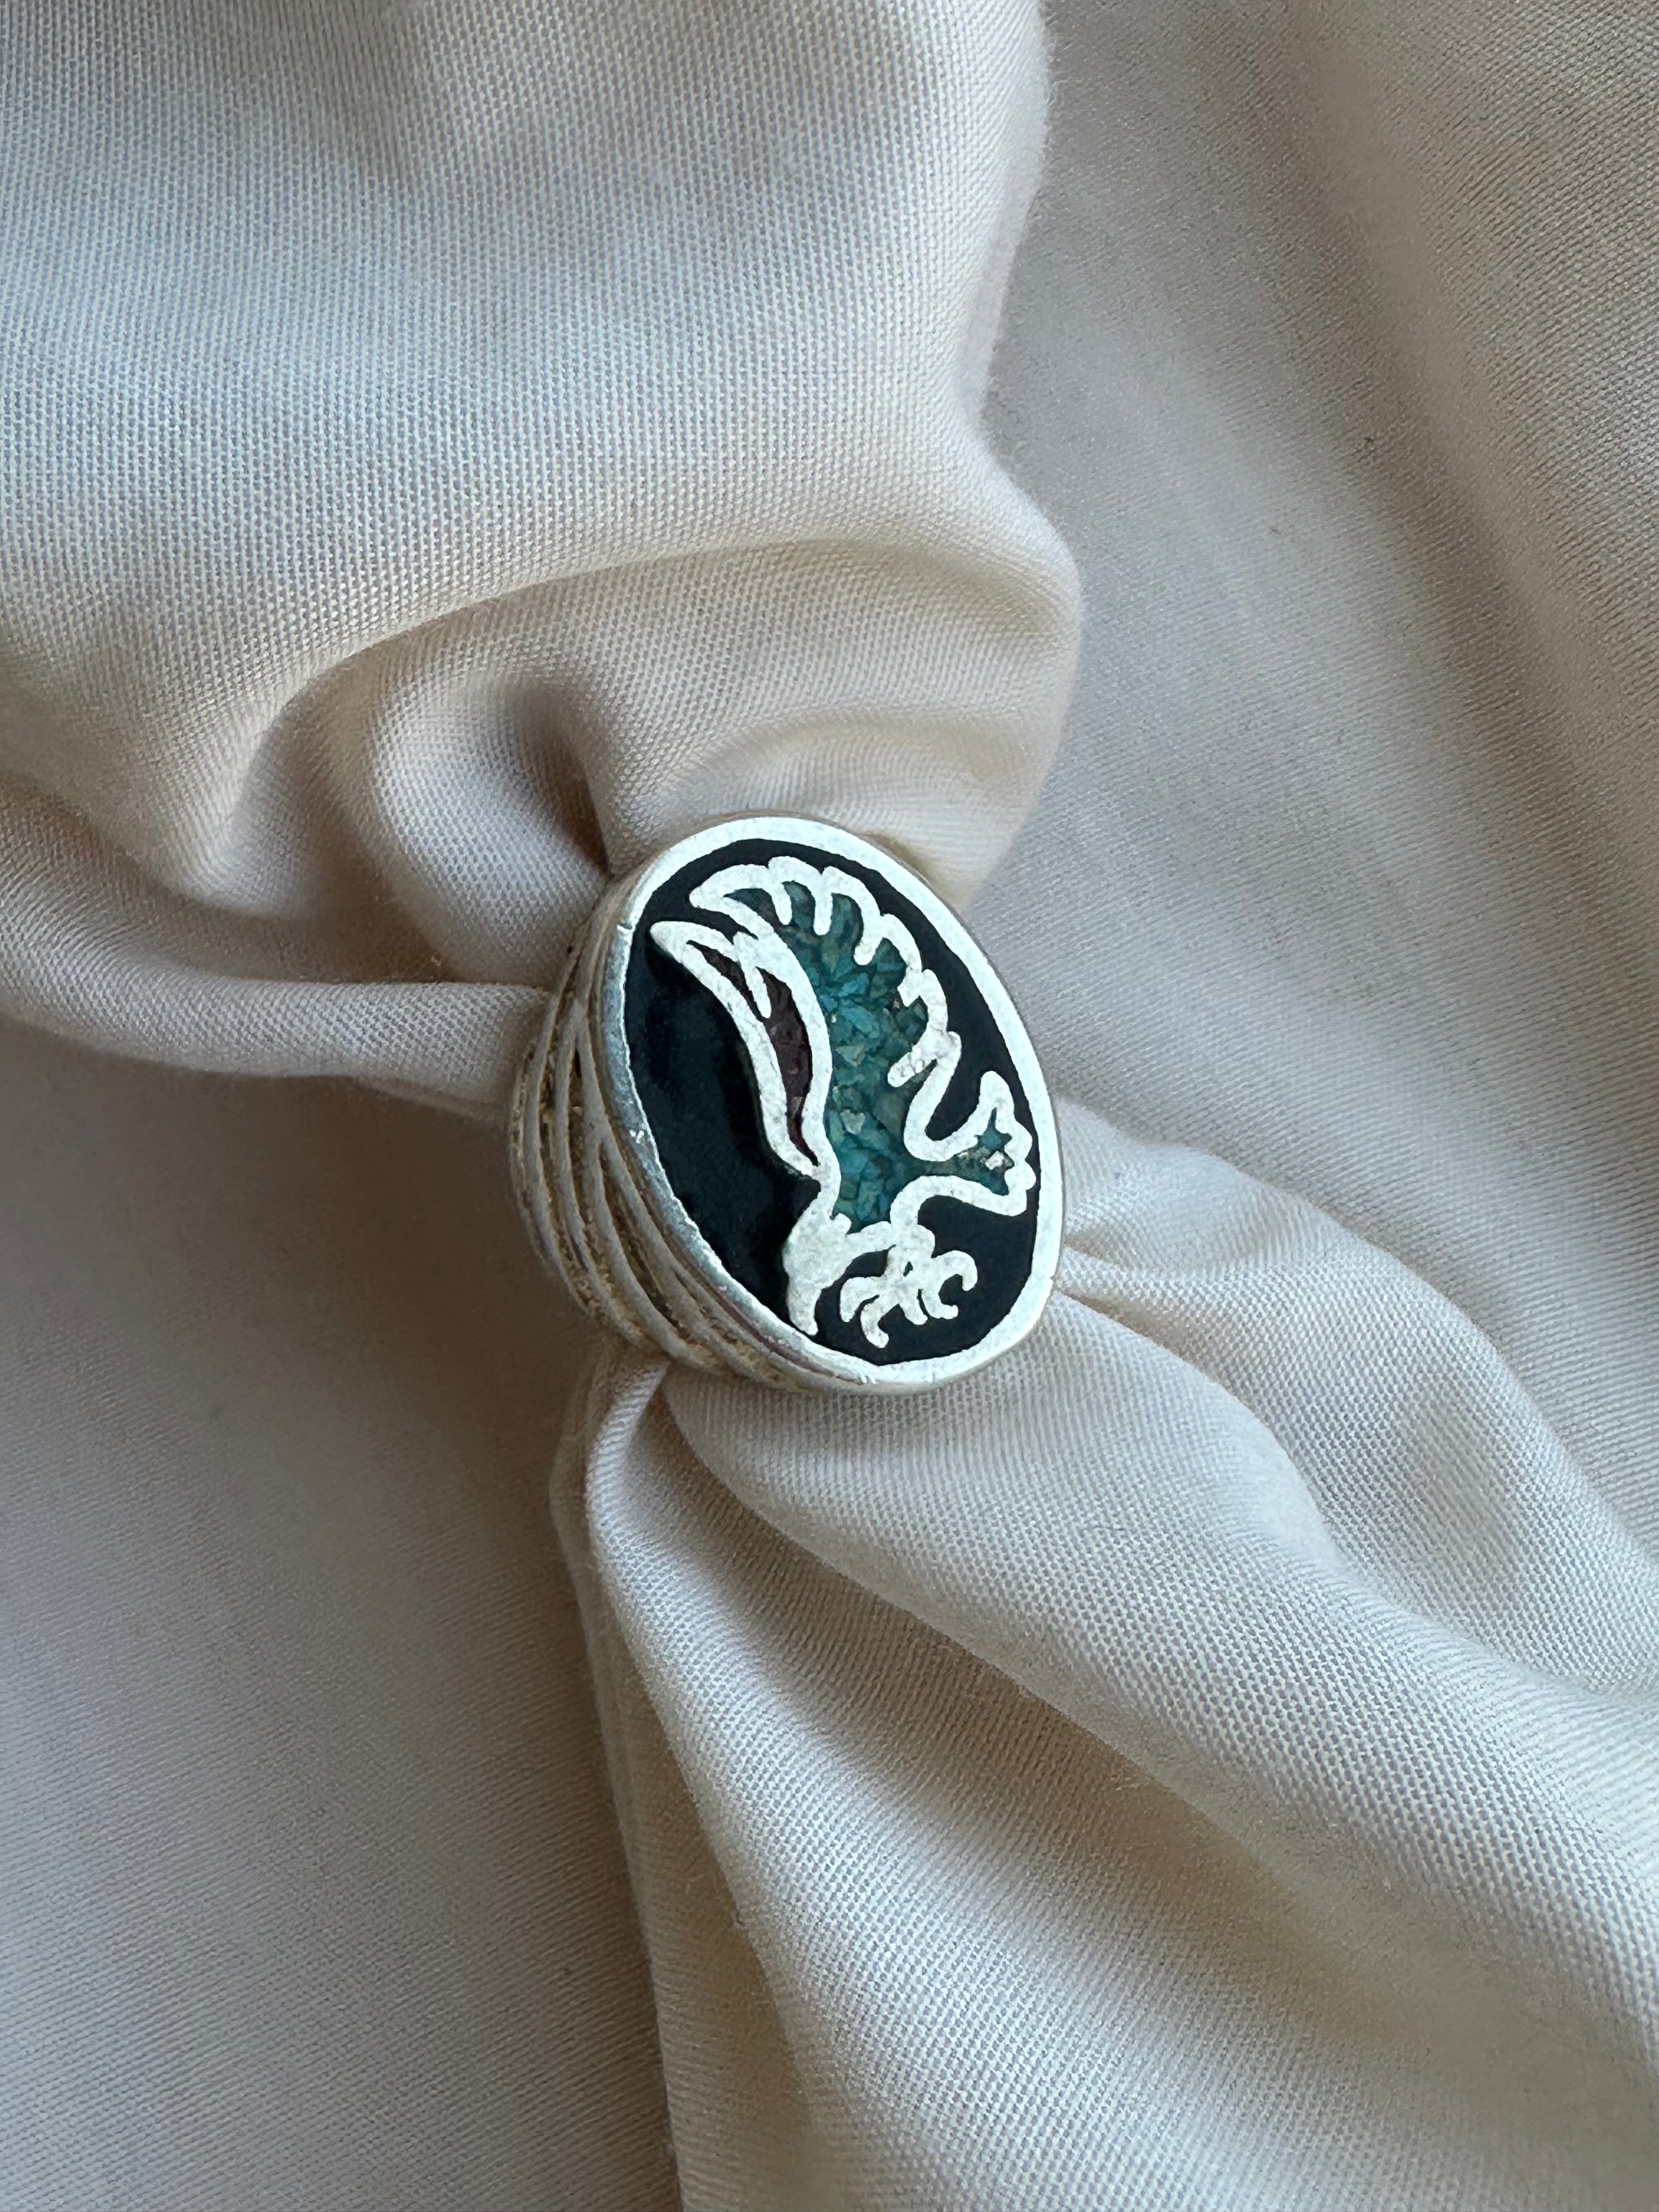 1986 G&S Eagle Ring Size 7